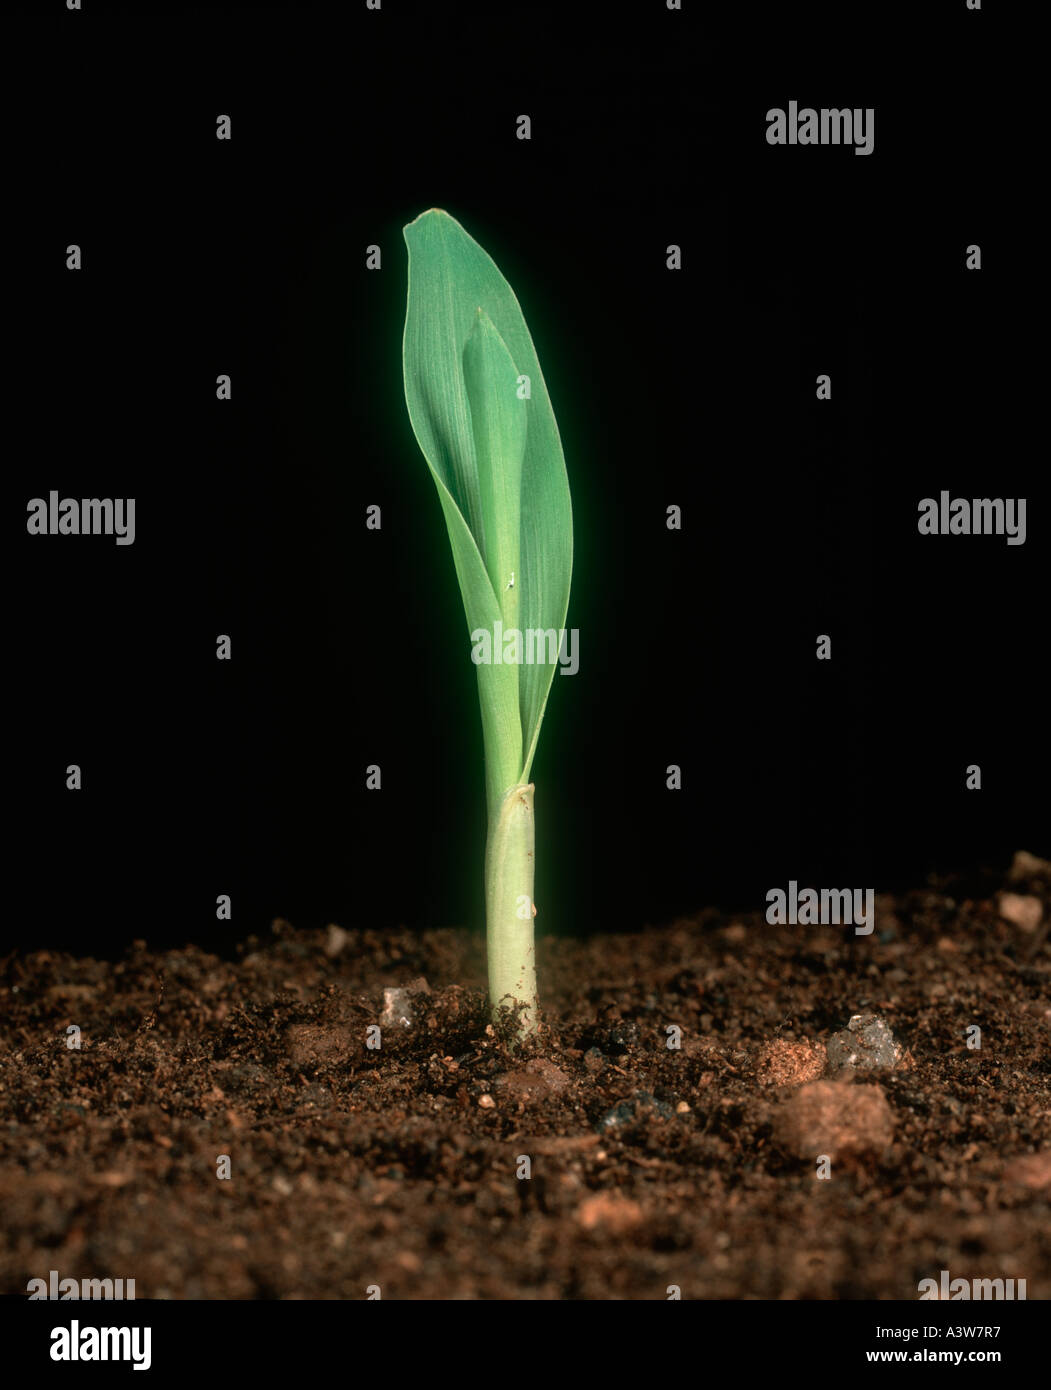 Corn maize sweetcorn seedling after emerging Stock Photo